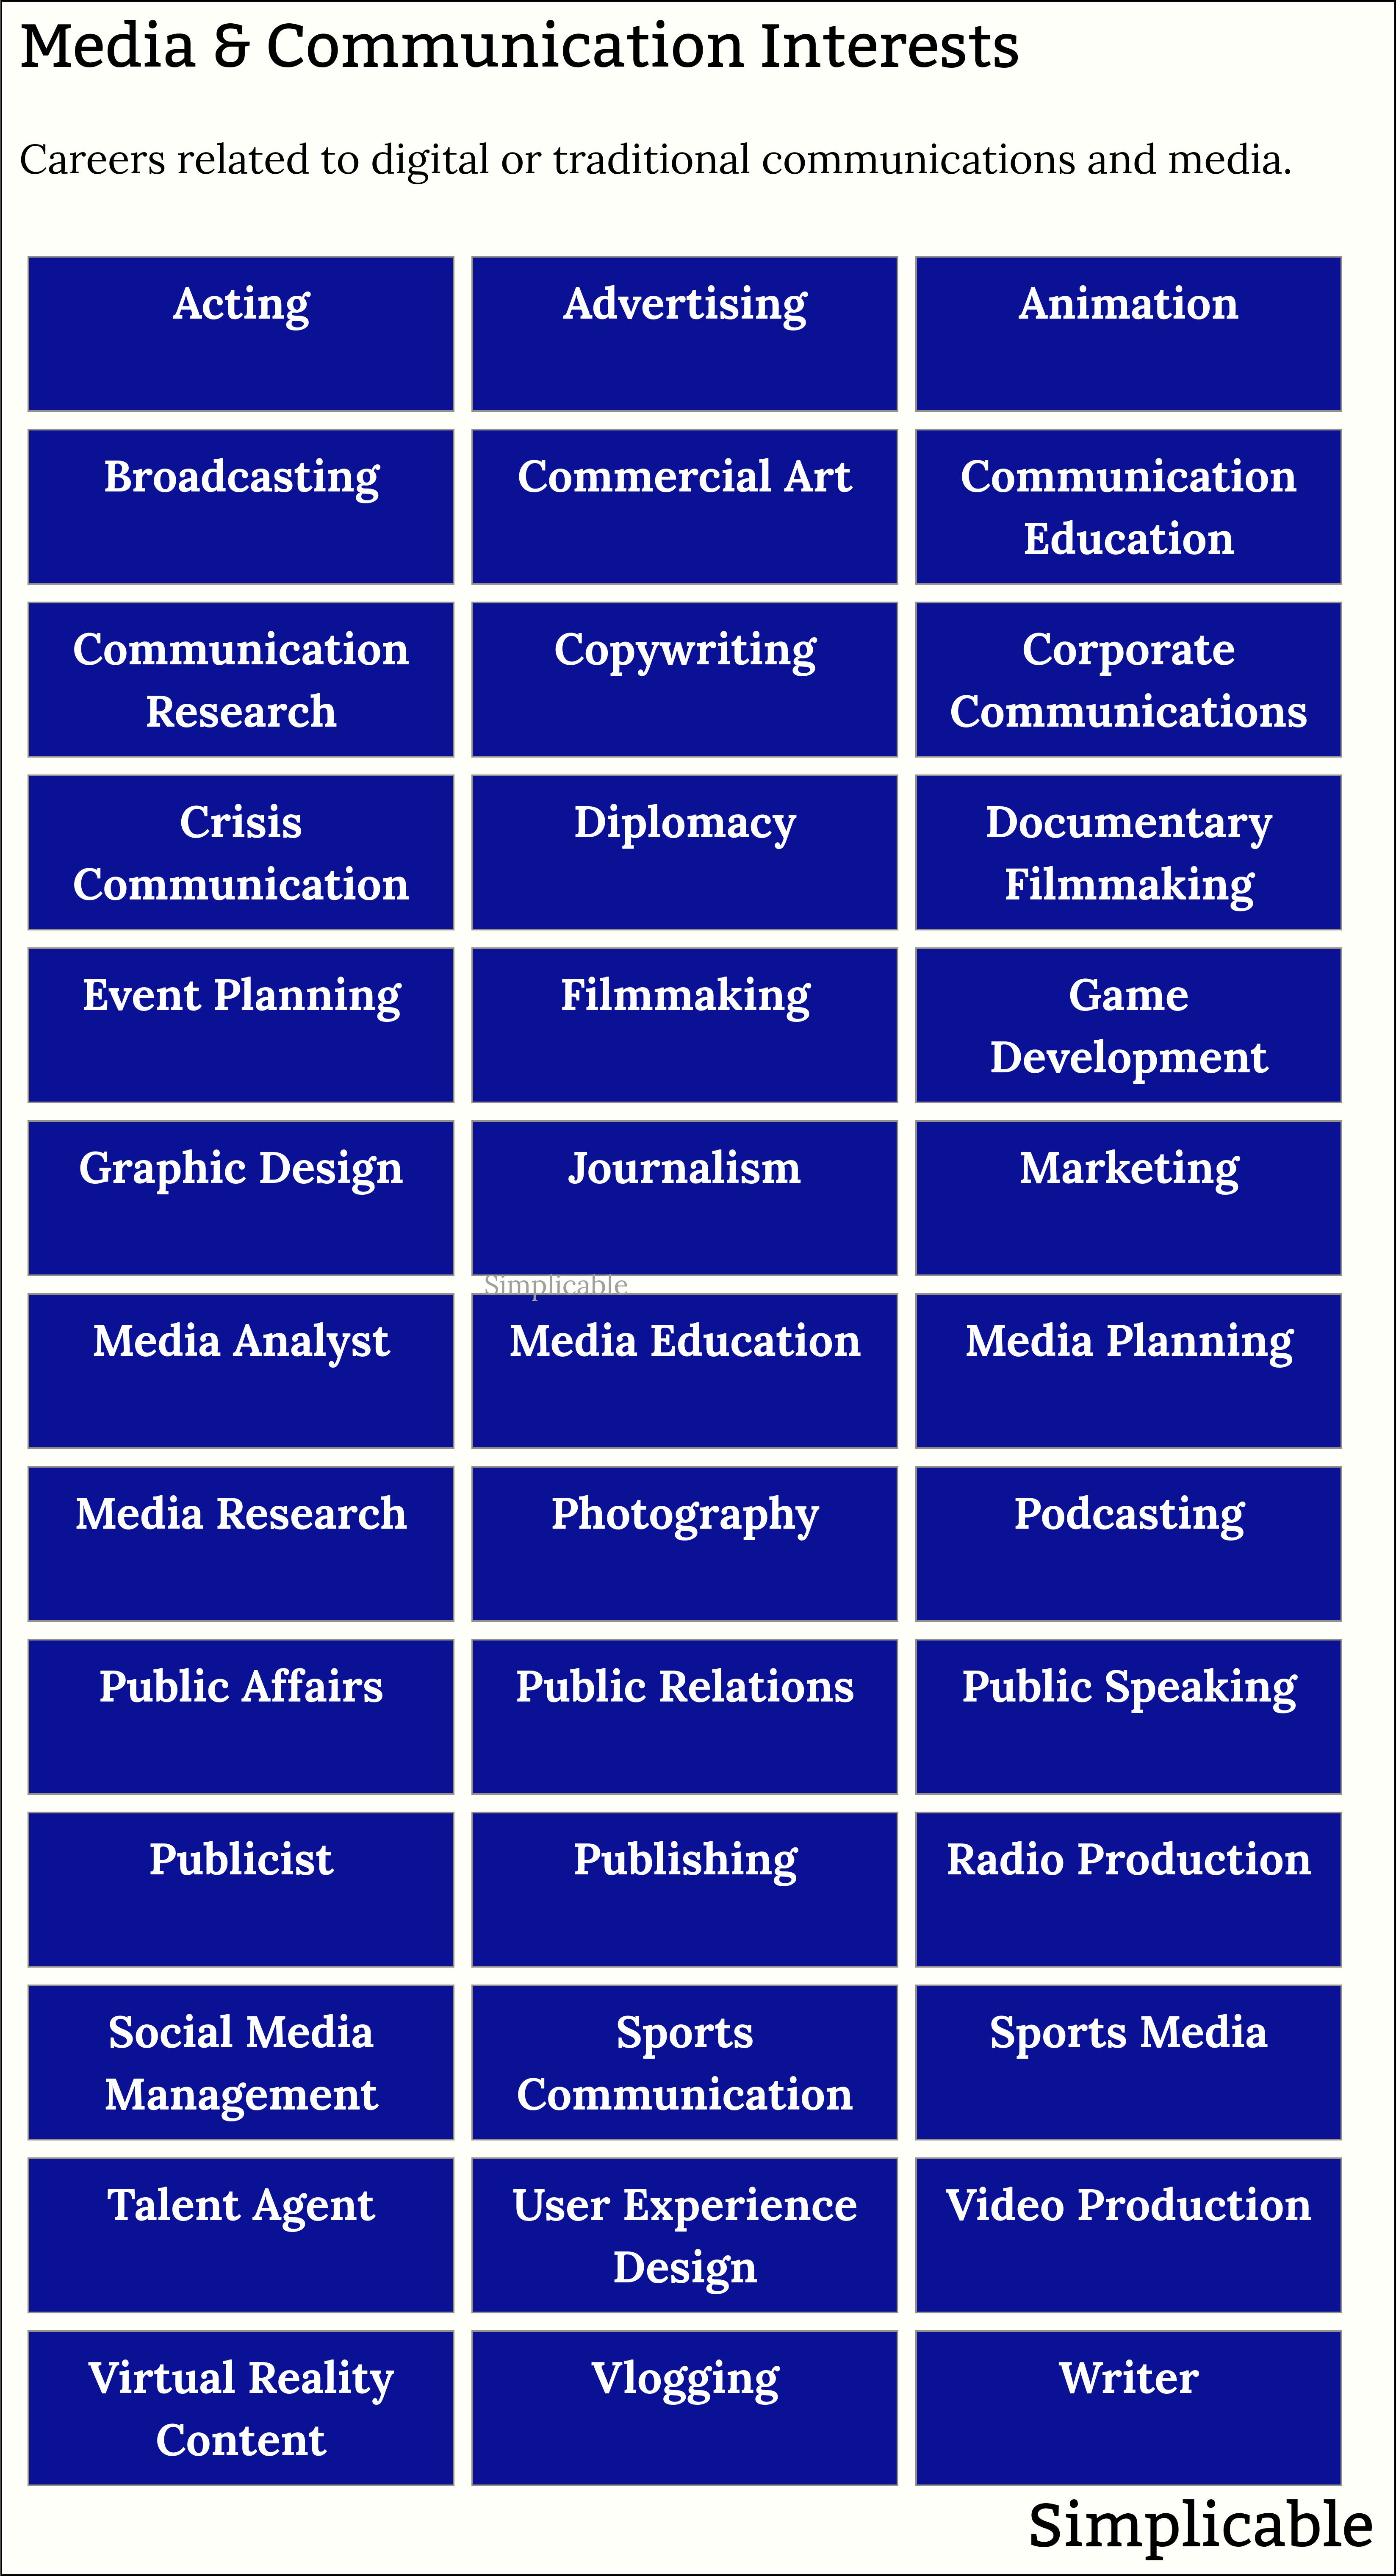 media and communication career interests